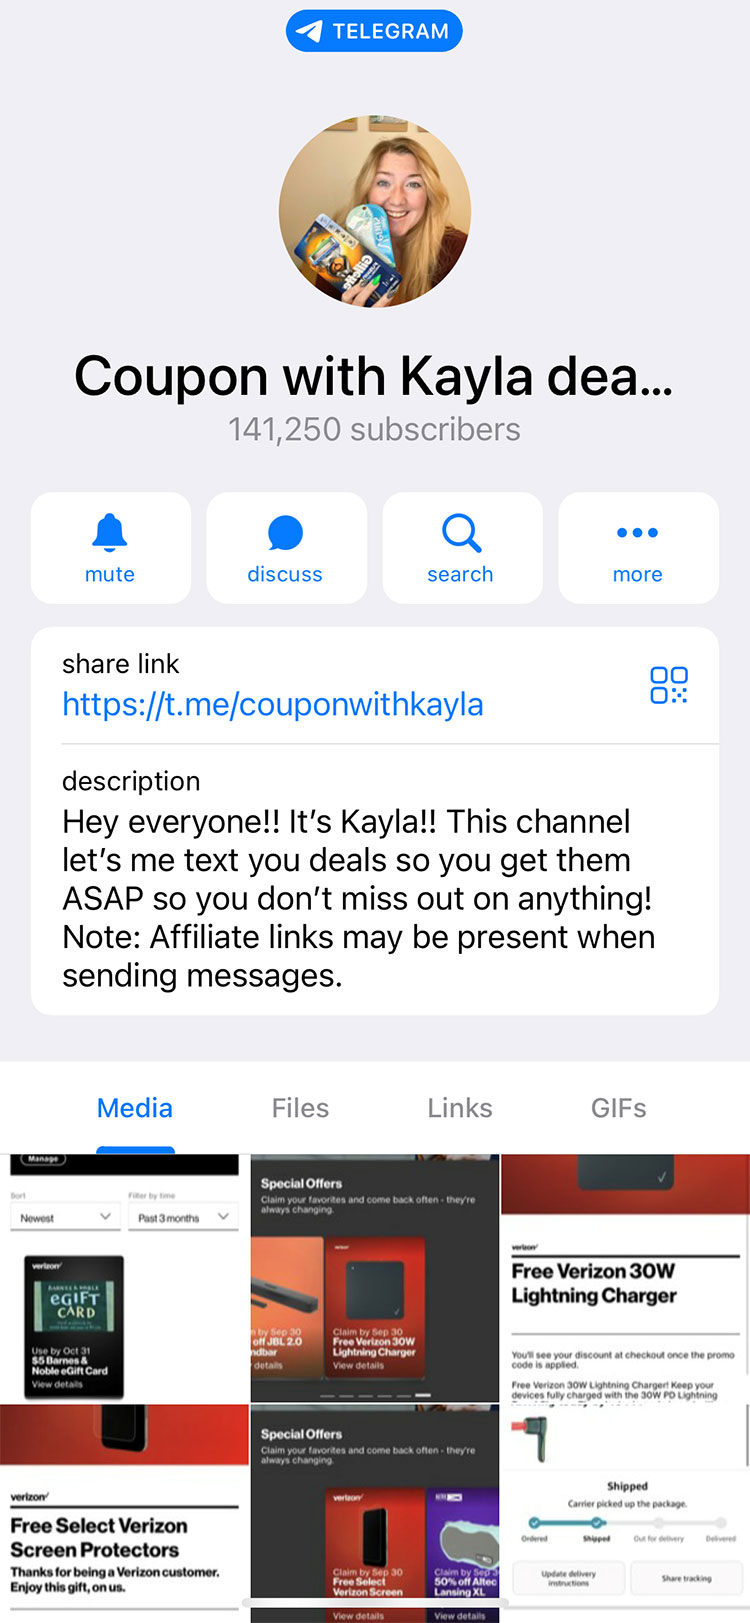 Coupon with Kayla deals!墨鱼联盟